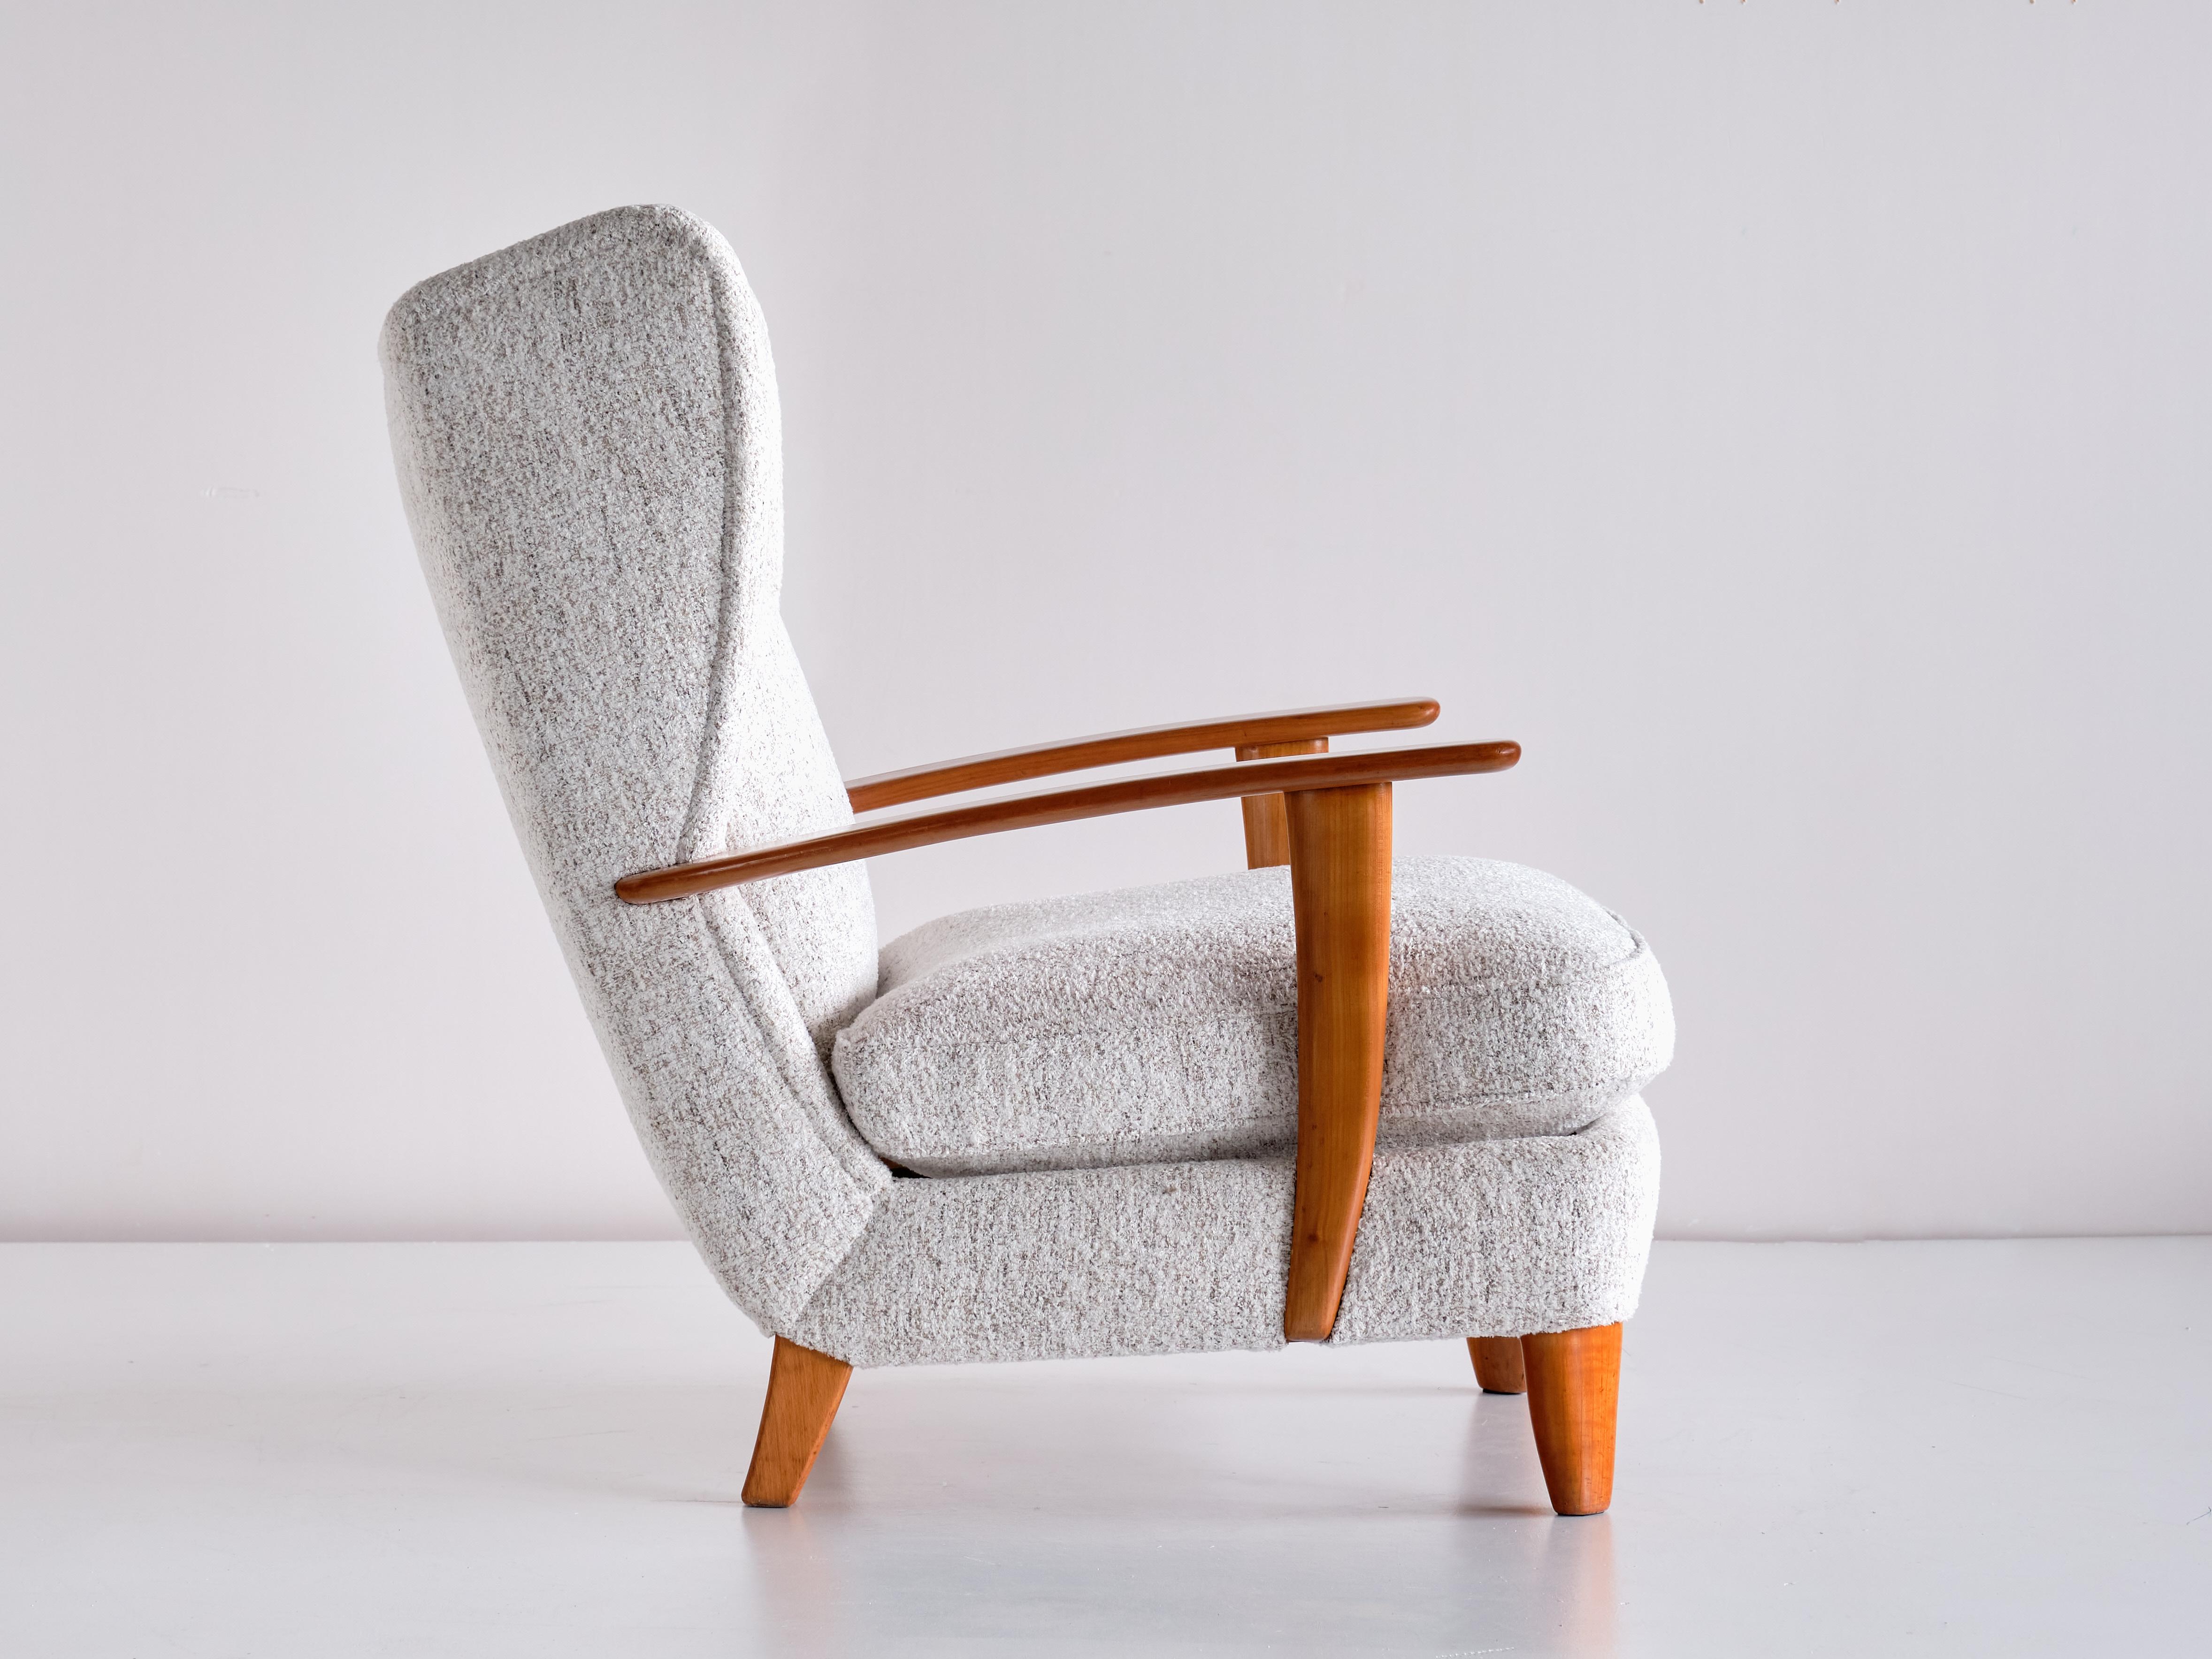 Italian Gio Ponti Wingback Chair in Cherry Wood and Mélange Nobilis Fabric, Italy, 1929 For Sale